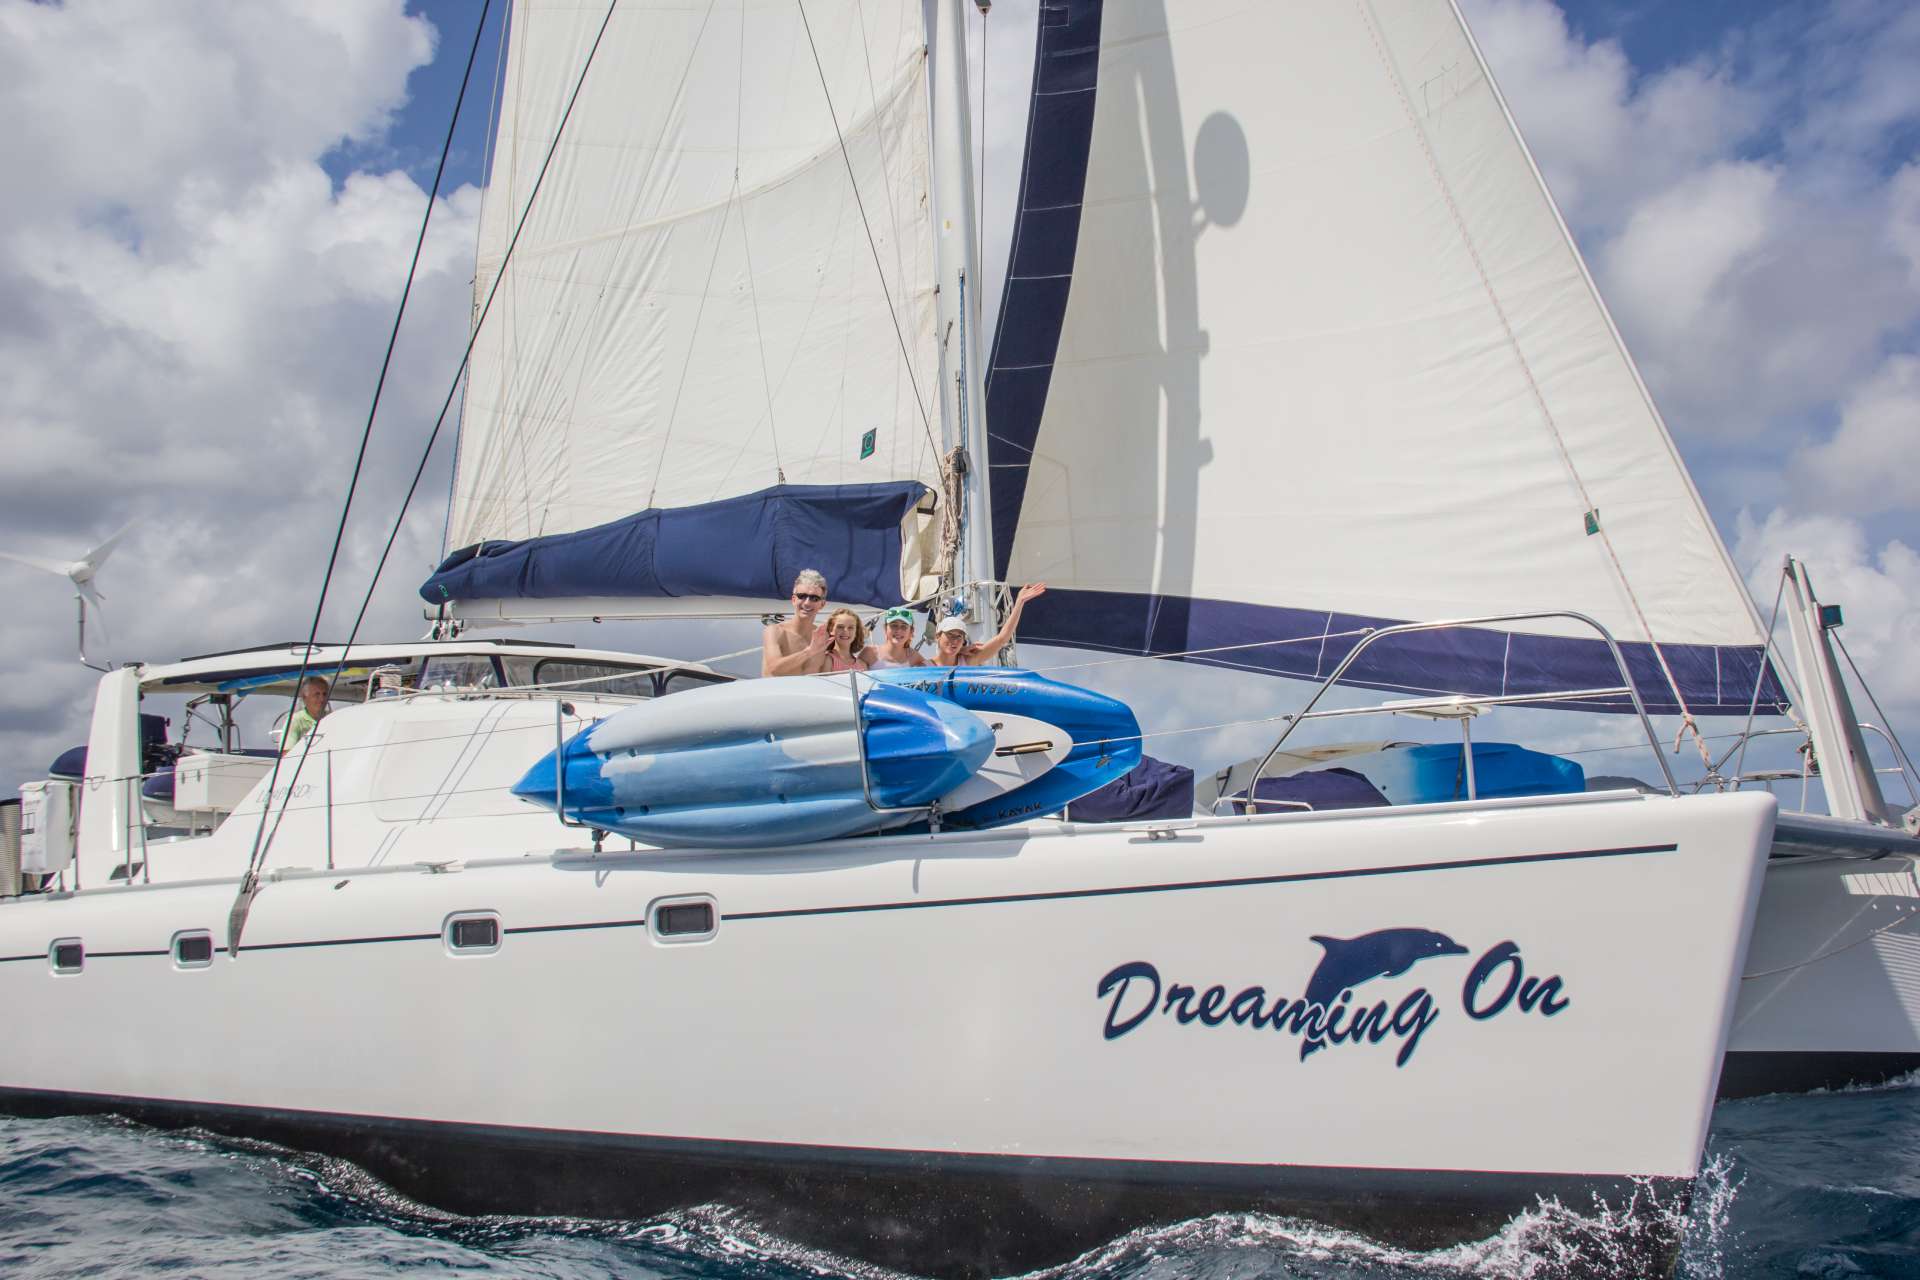 dreaming on - Yacht Charter Vancouver Island & Boat hire in Central america, Belize 2